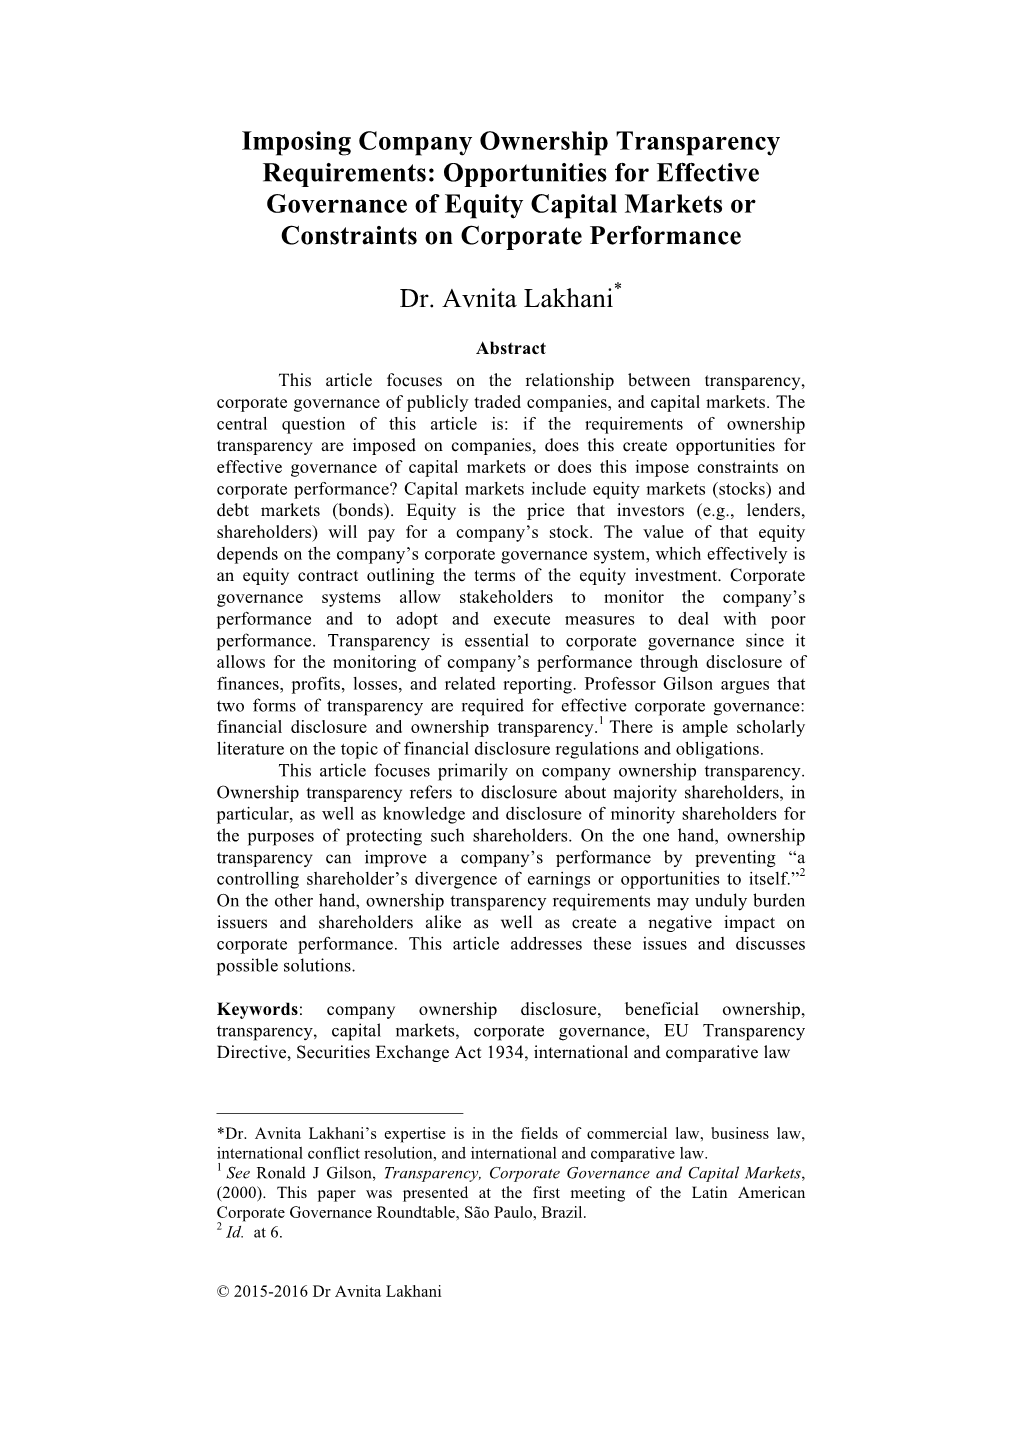 Imposing Company Ownership Transparency Requirements: Opportunities for Effective Governance of Equity Capital Markets Or Constraints on Corporate Performance